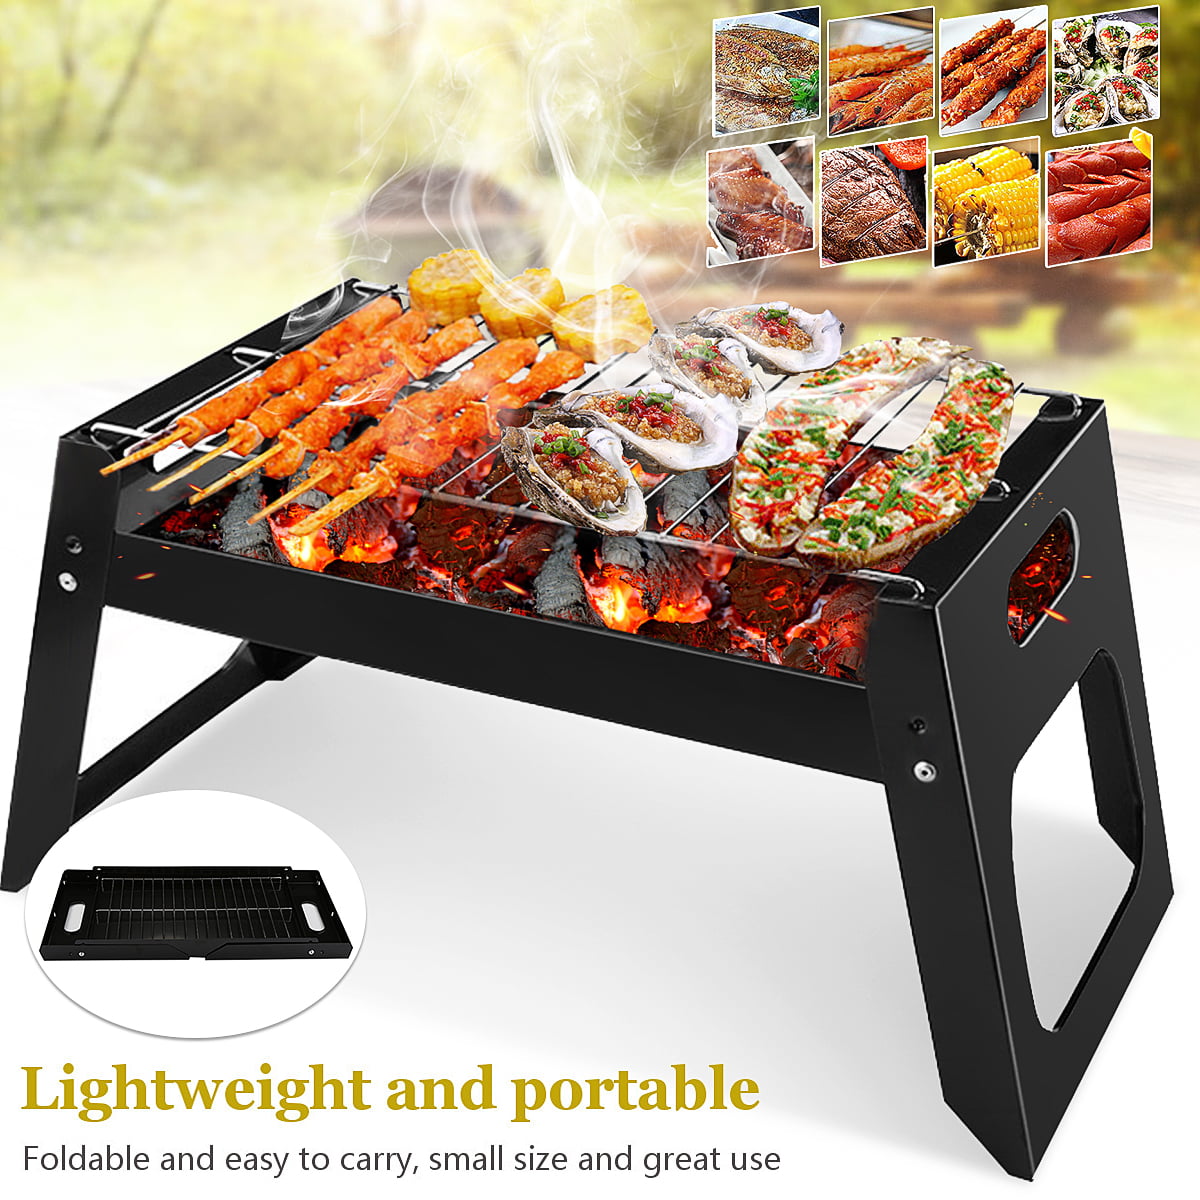 Charcoal BBQ Grill Barbecue Red Camp Garden Picnic Outdoor Portable Grill BBQ 